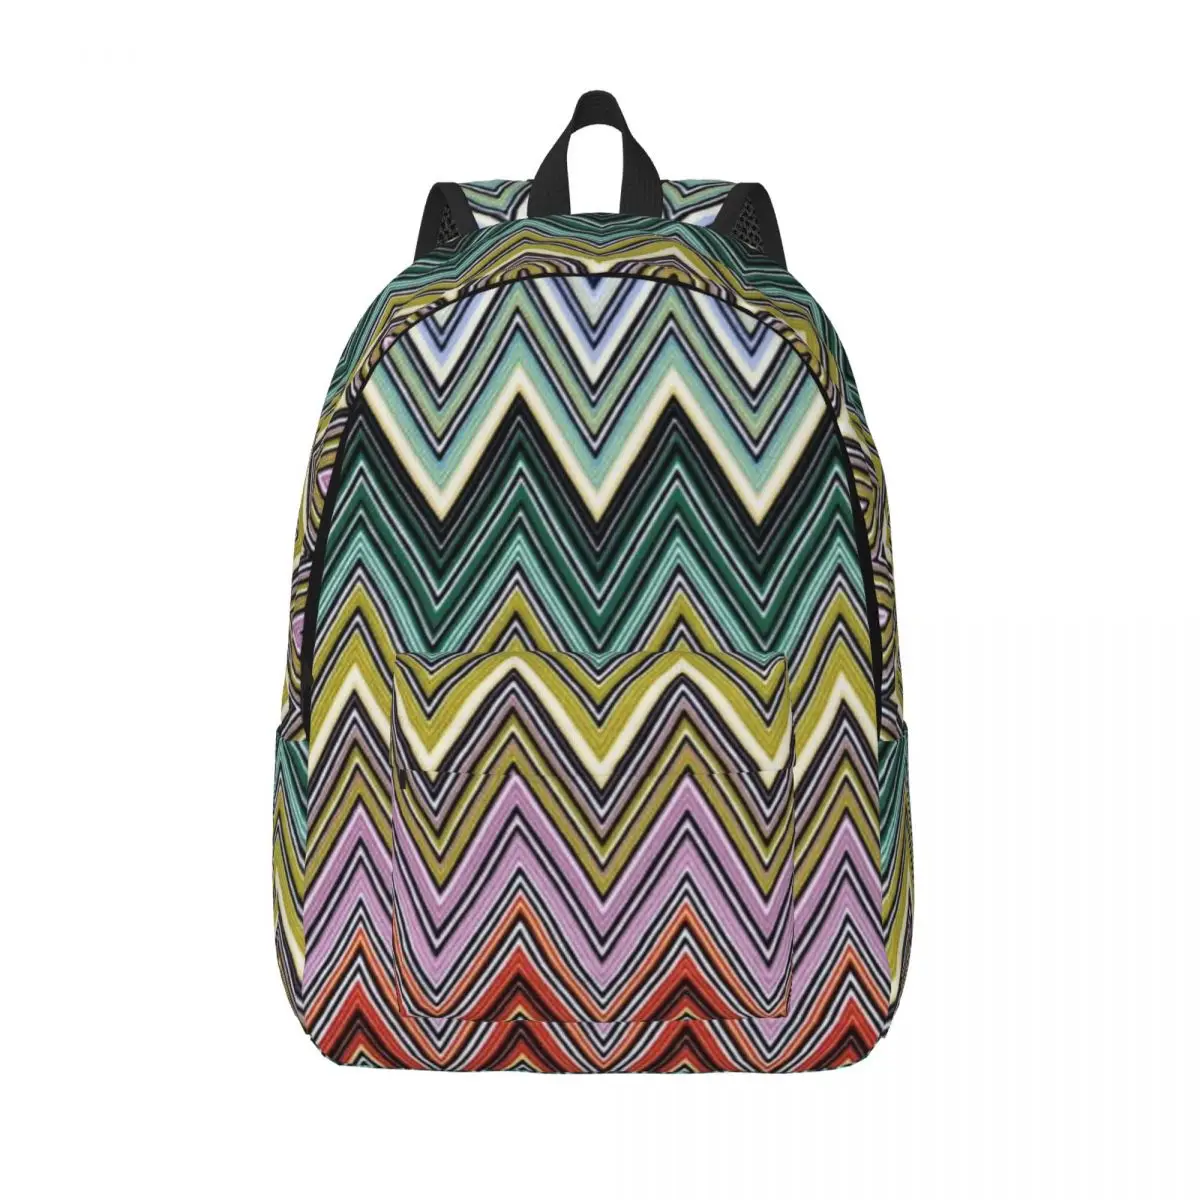 

Boho Home Zig Zag Laptop Backpack Men Women Casual Bookbag for School College Students Chic Abstract Geometric Zigzag Bags